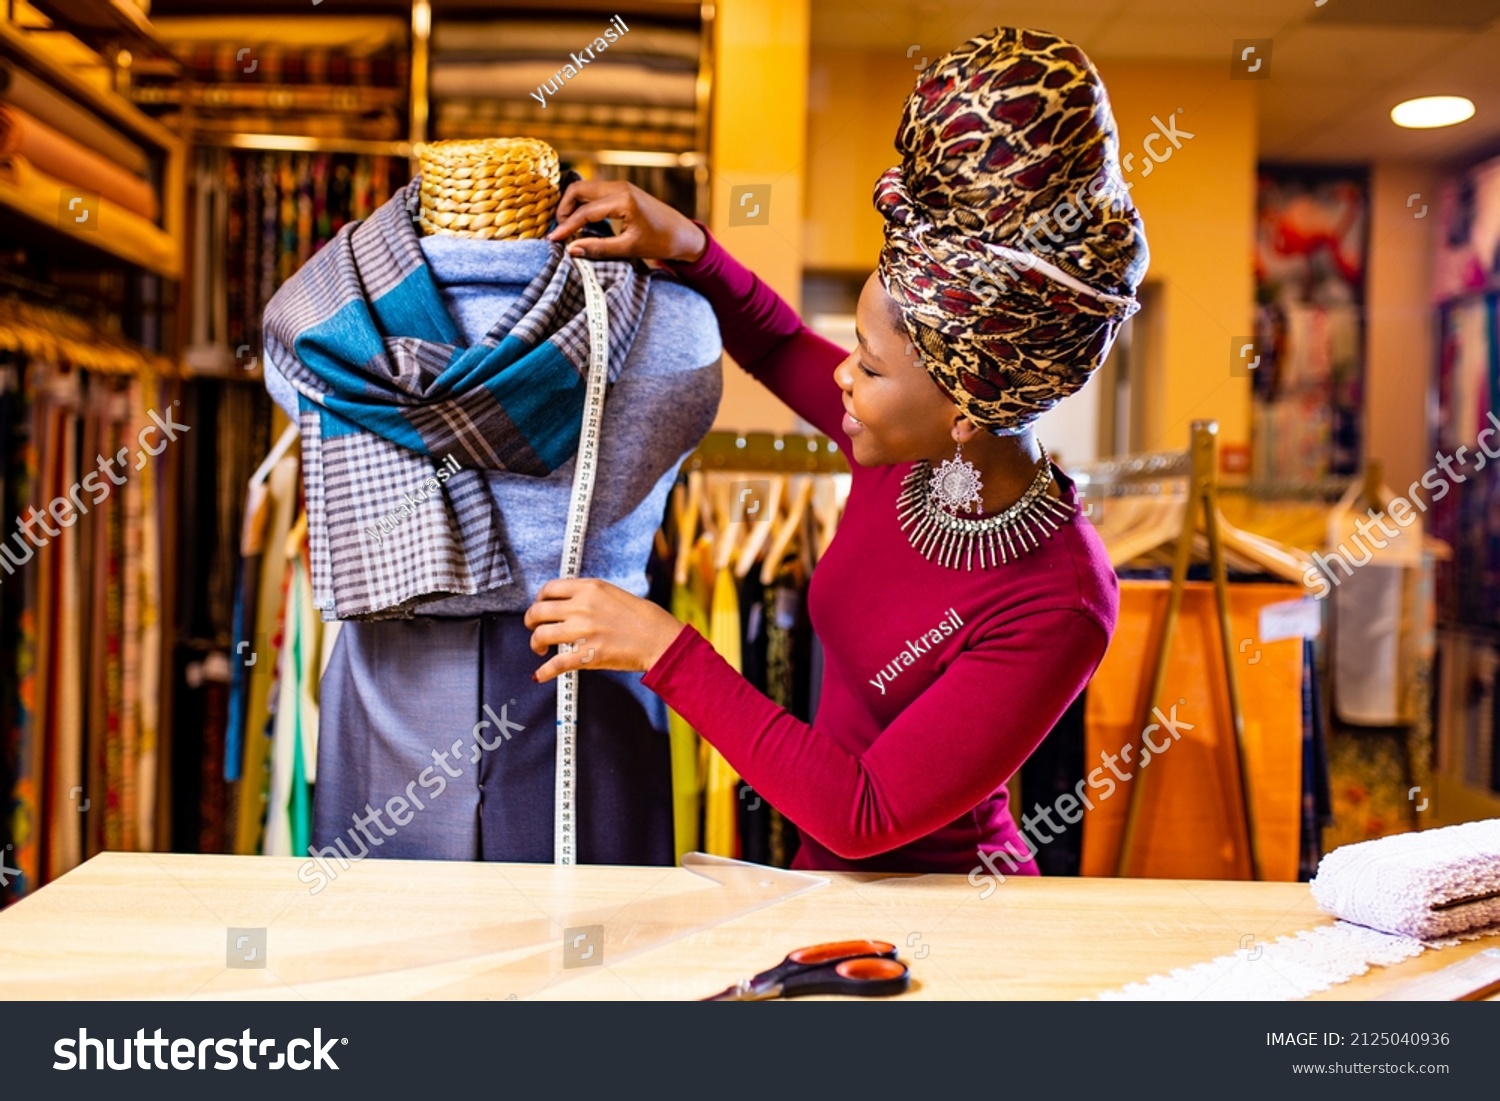 Textile Industry Africa Images Stock Photos Vectors Shutterstock